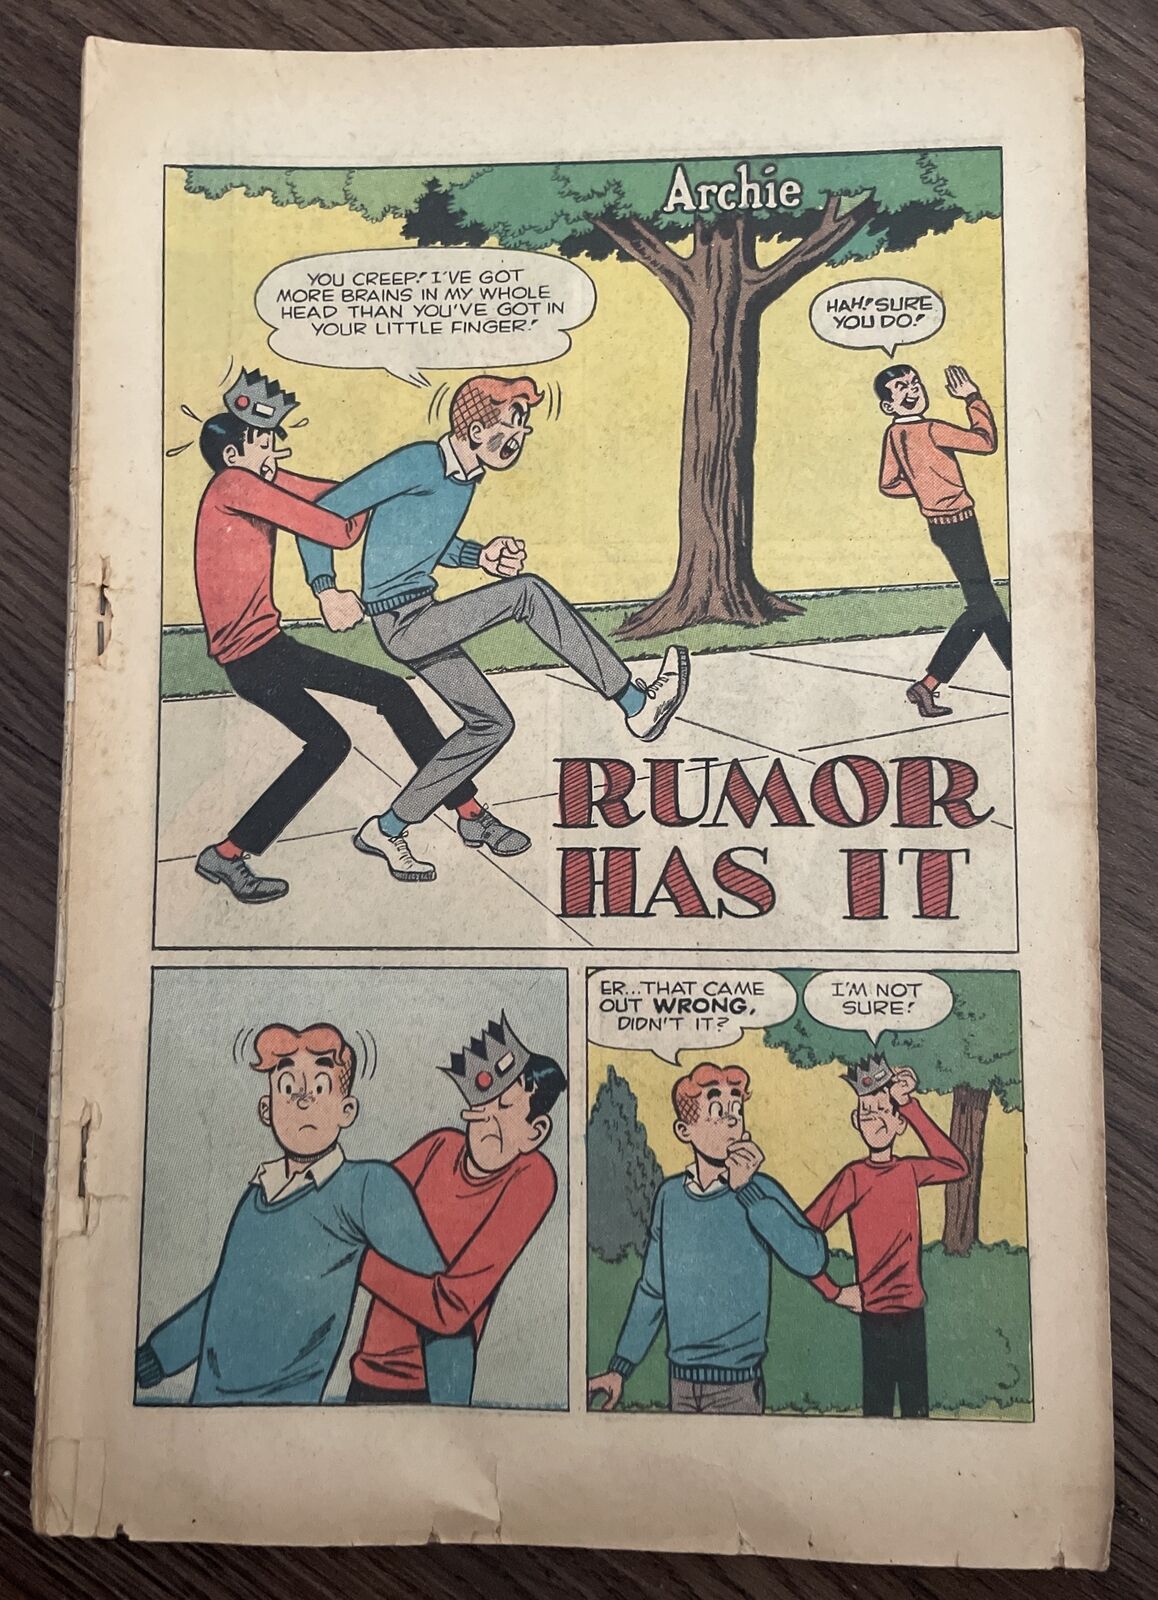 ARCHIE ANNUAL Issue #17 1965 1966 Rumor Has It Missing Cover Vintage